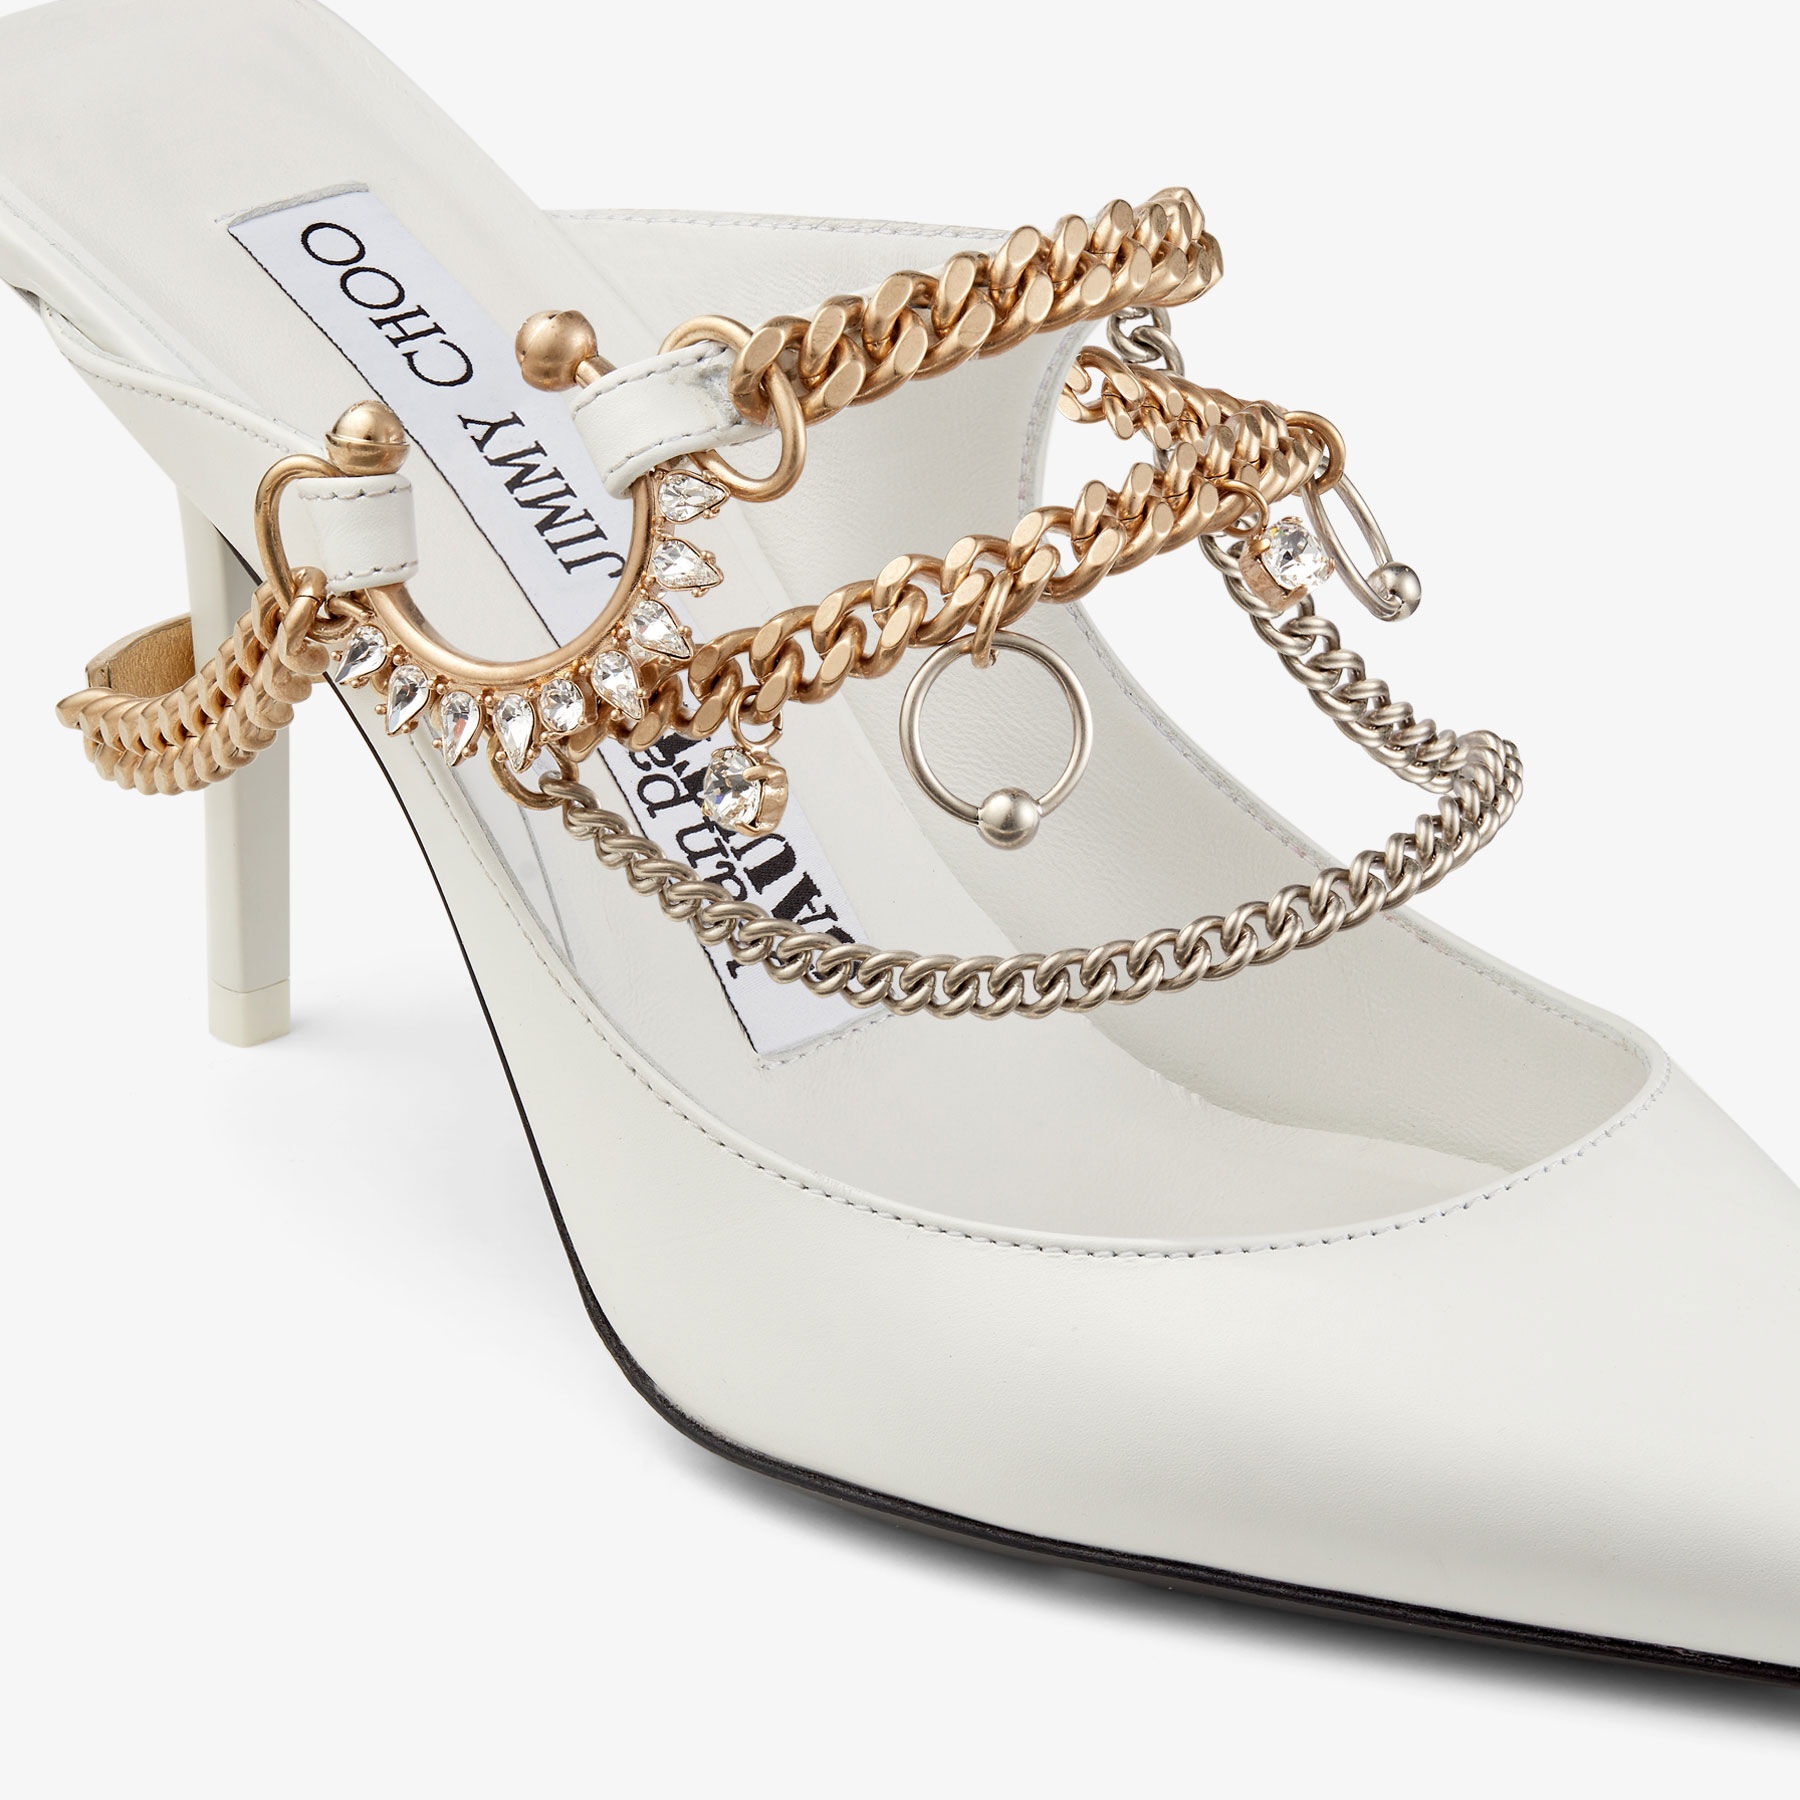 Jimmy Choo / Jean Paul Gaultier Bing 90
Optical White Calf Leather Mules with Jewellery - 4